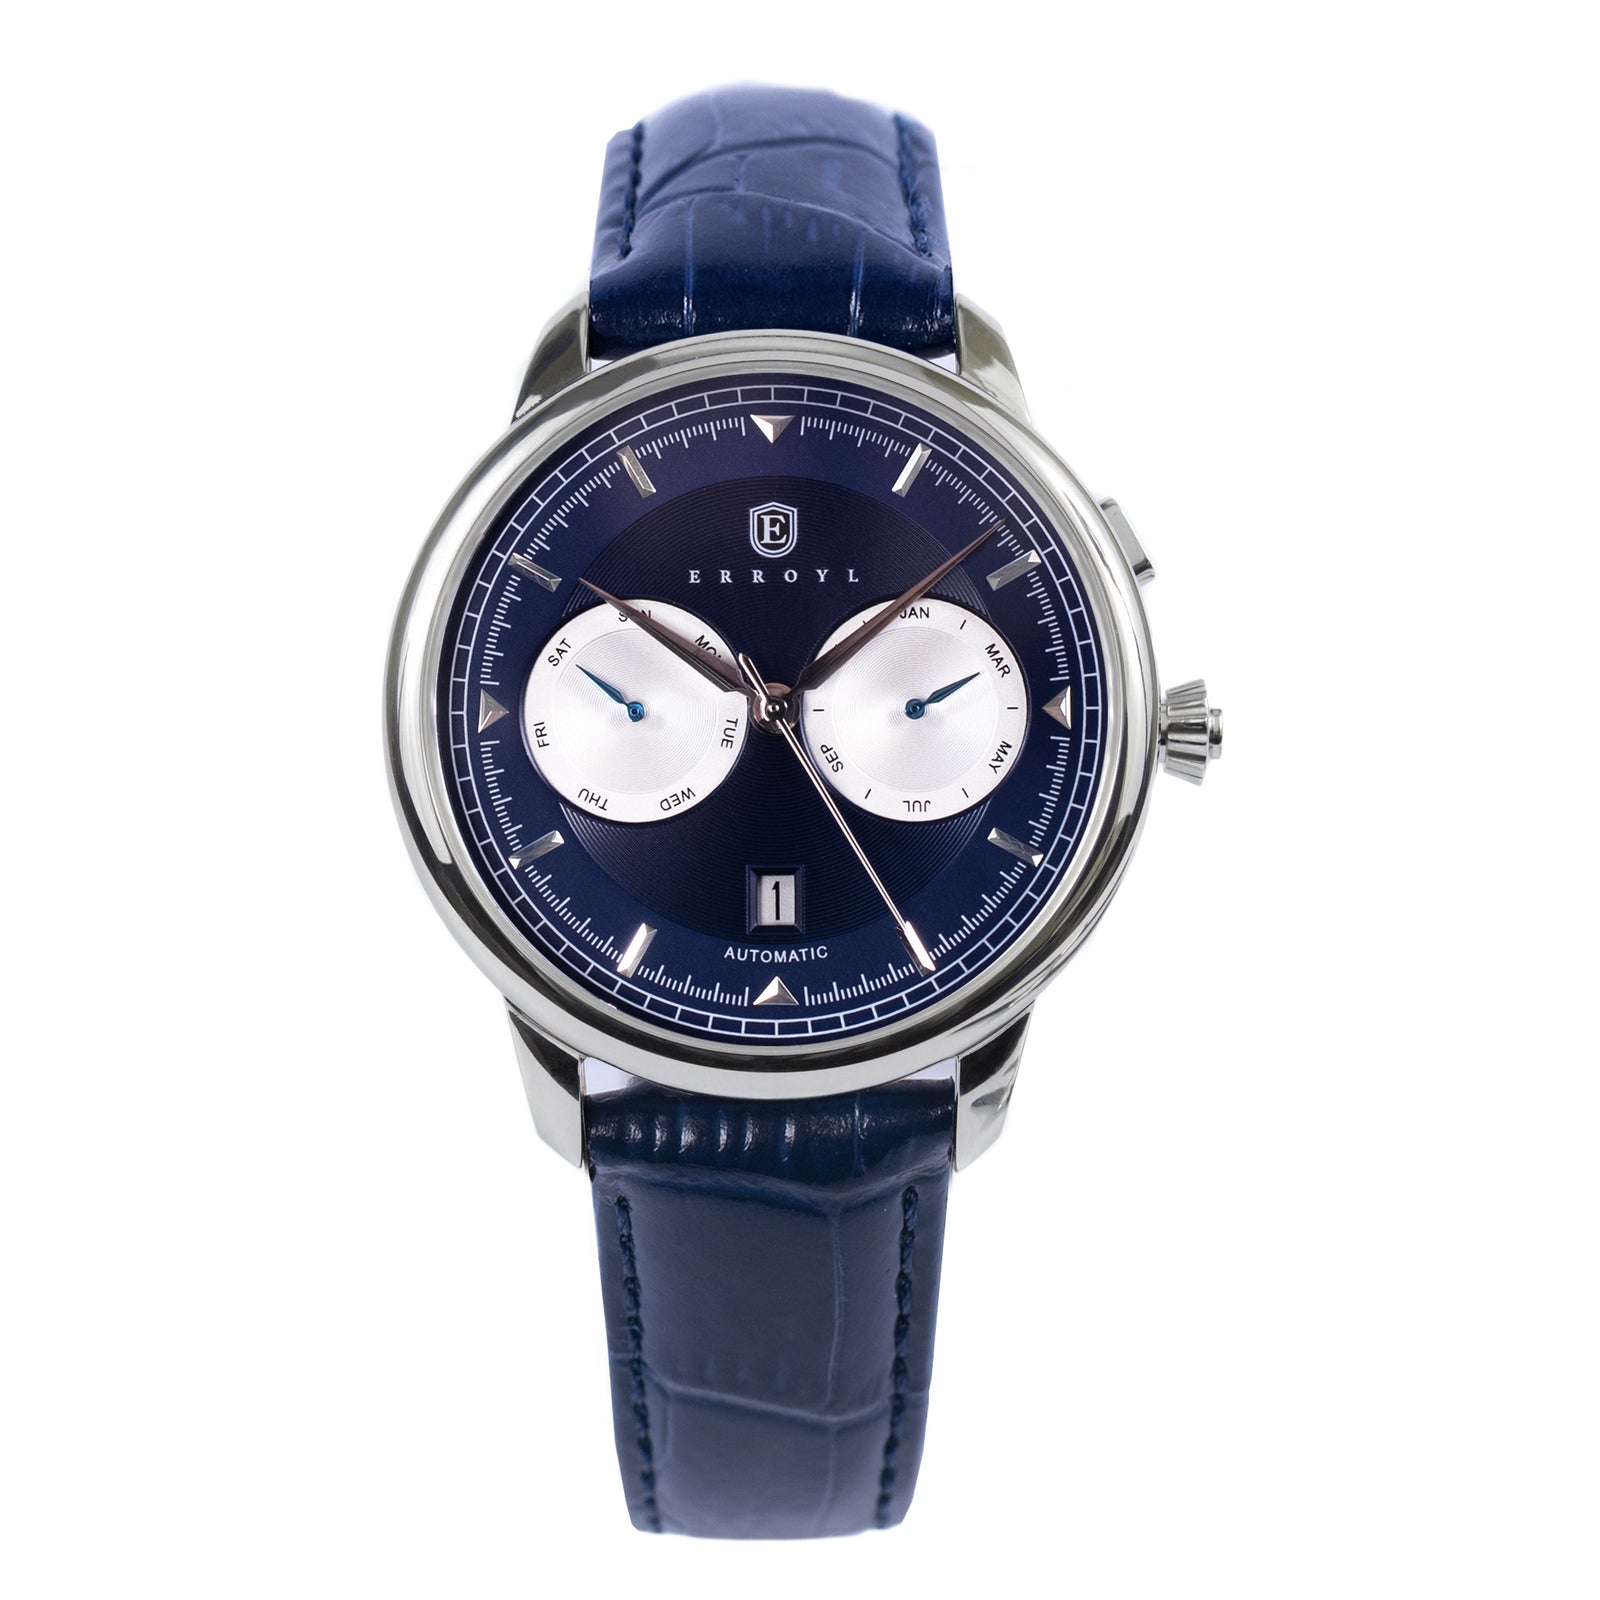 Mechanical Watches For Men, ERROYL Collection - the Regent